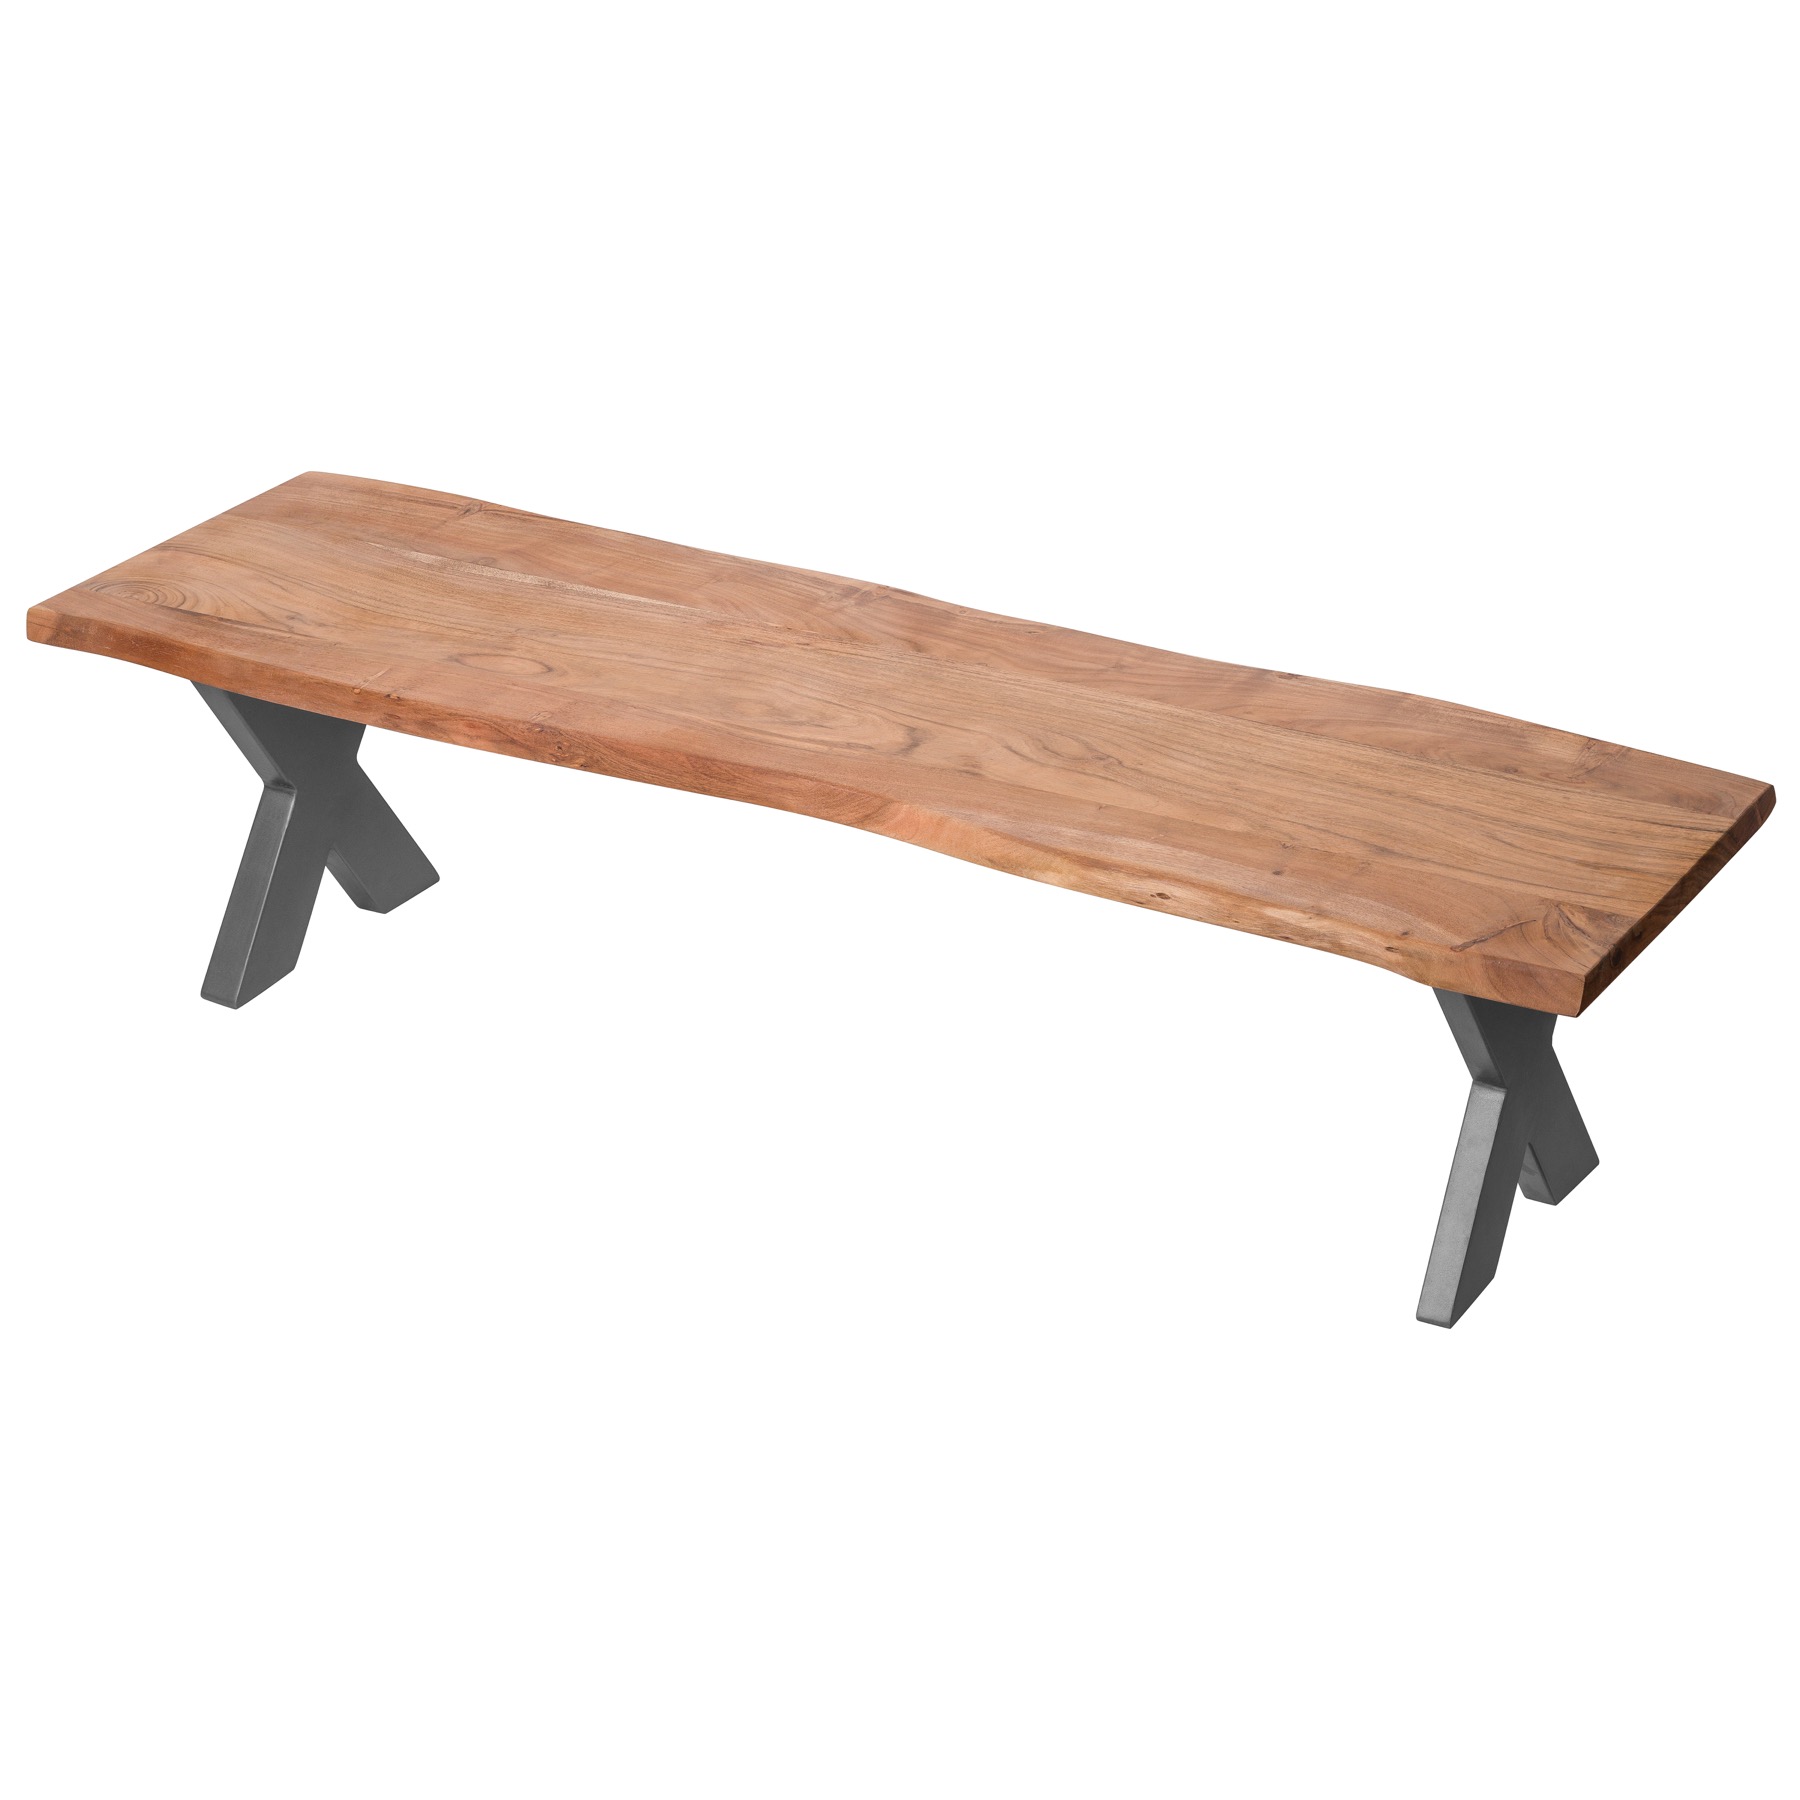 Live Edge Collection Bench - Image 1